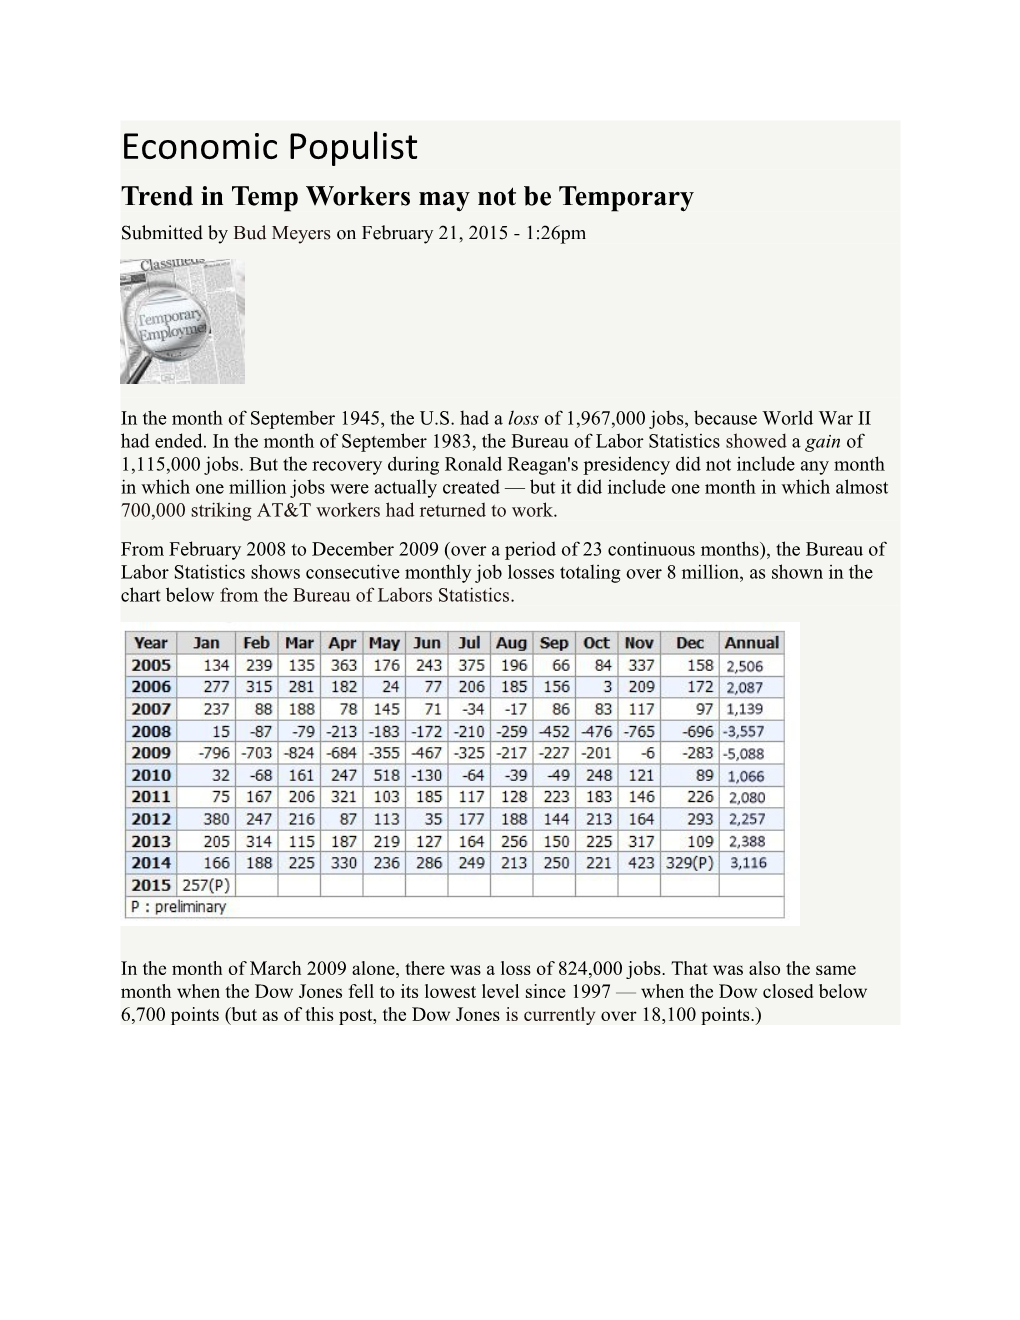 Trend in Temp Workers May Not Be Temporary